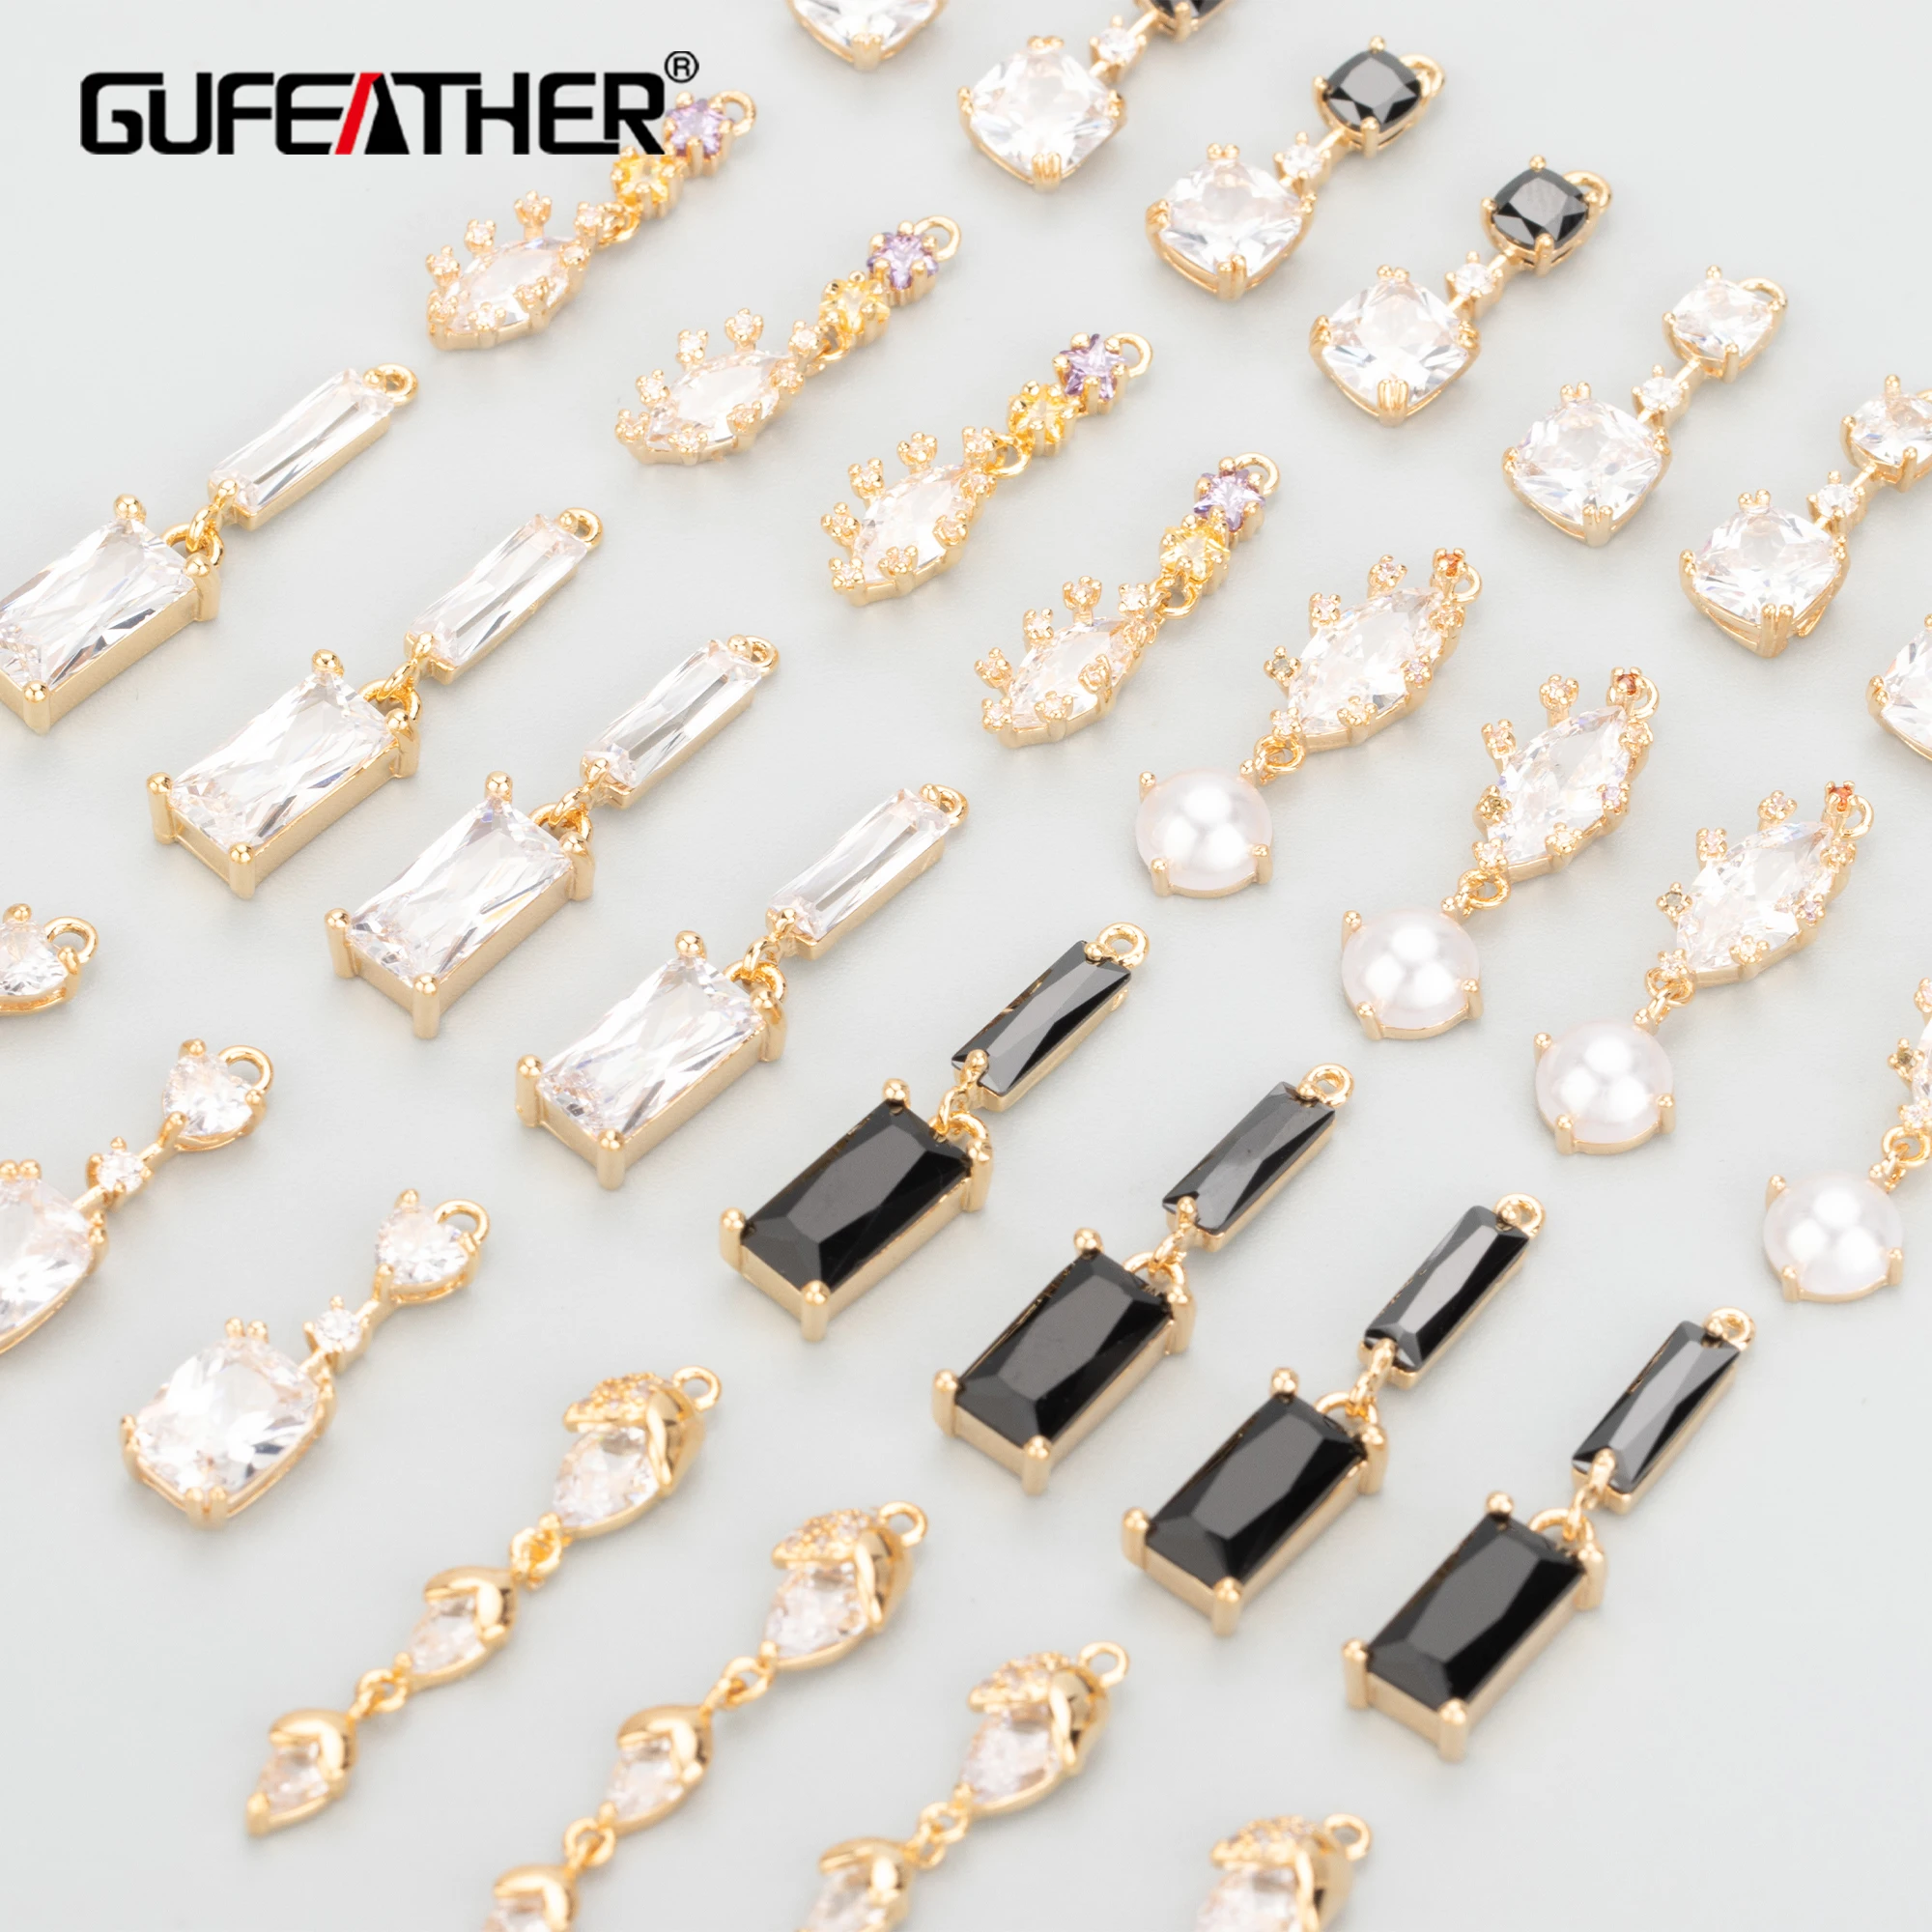 

GUFEATHER MB60,jewelry accessories,18k gold plated,nickel free,copper,zircons,glass,charms,jewelry making,diy pendants,6pcs/lot